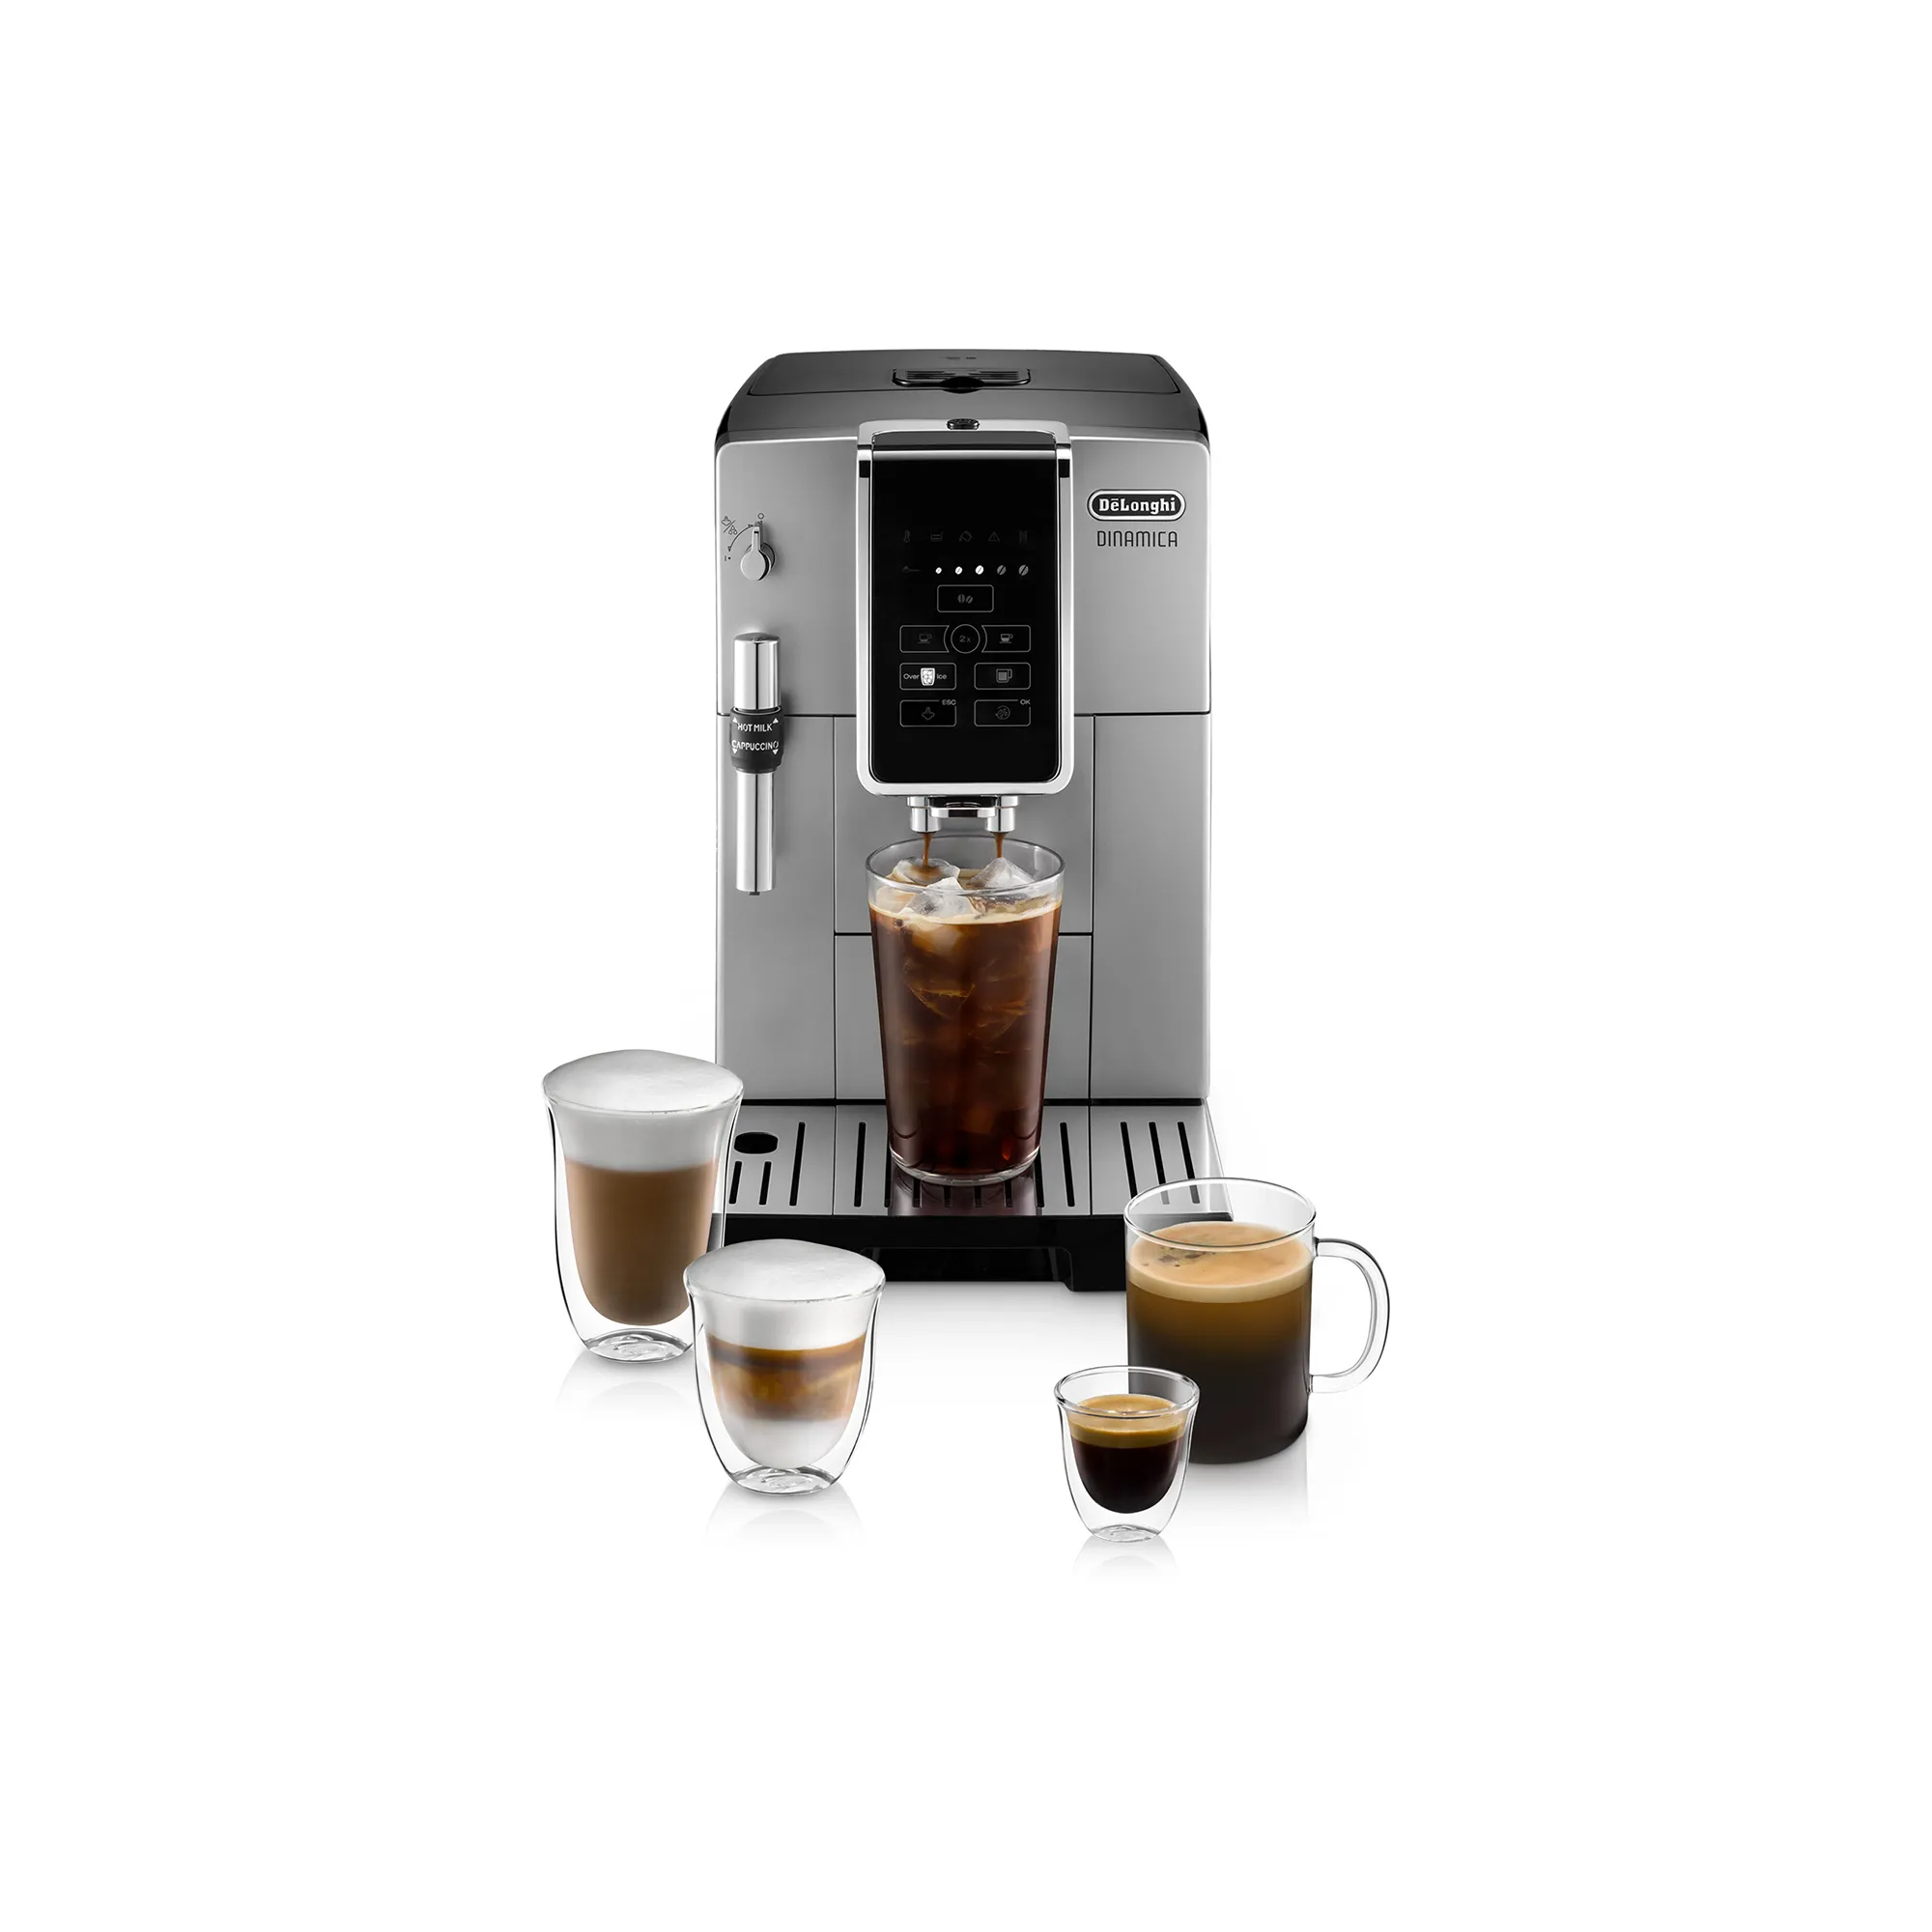 https://www.homethreads.com/files/delonghi/ecam35025sb-dinamica-fully-automatic-coffee-and-espresso-machine-with-premium-adjustable-frother-1.webp